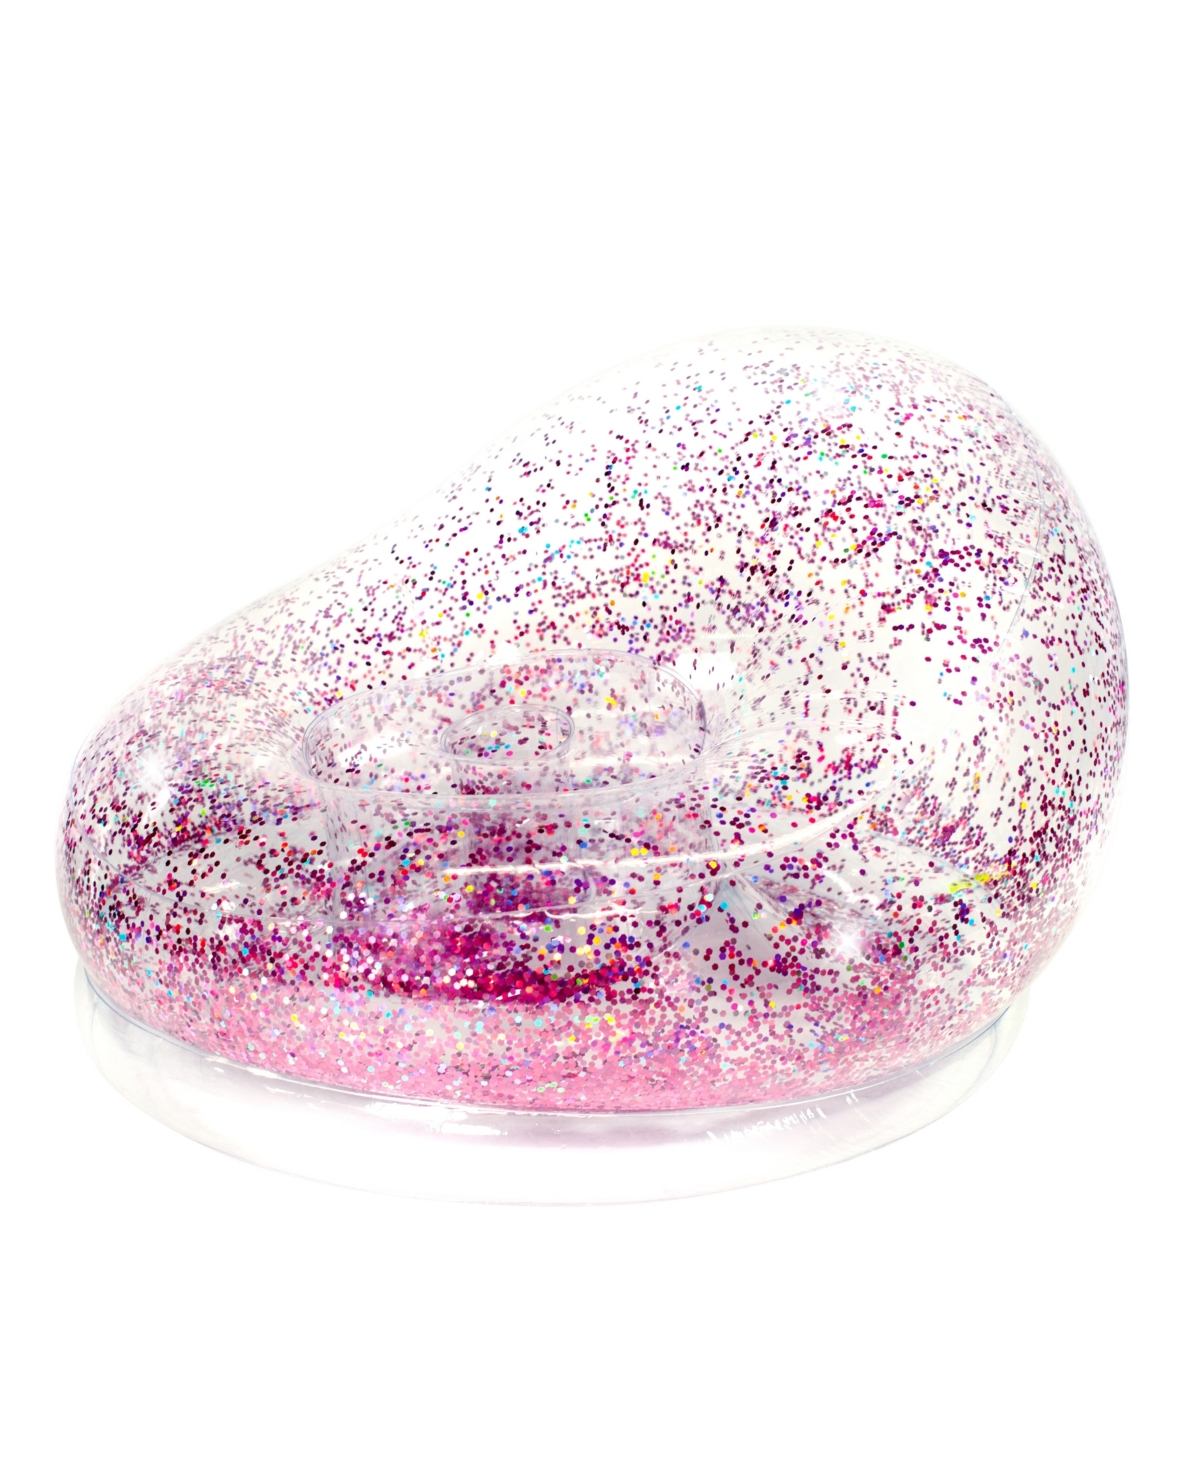 PoolCandy's AirCandy Glitter Inflatable Chair